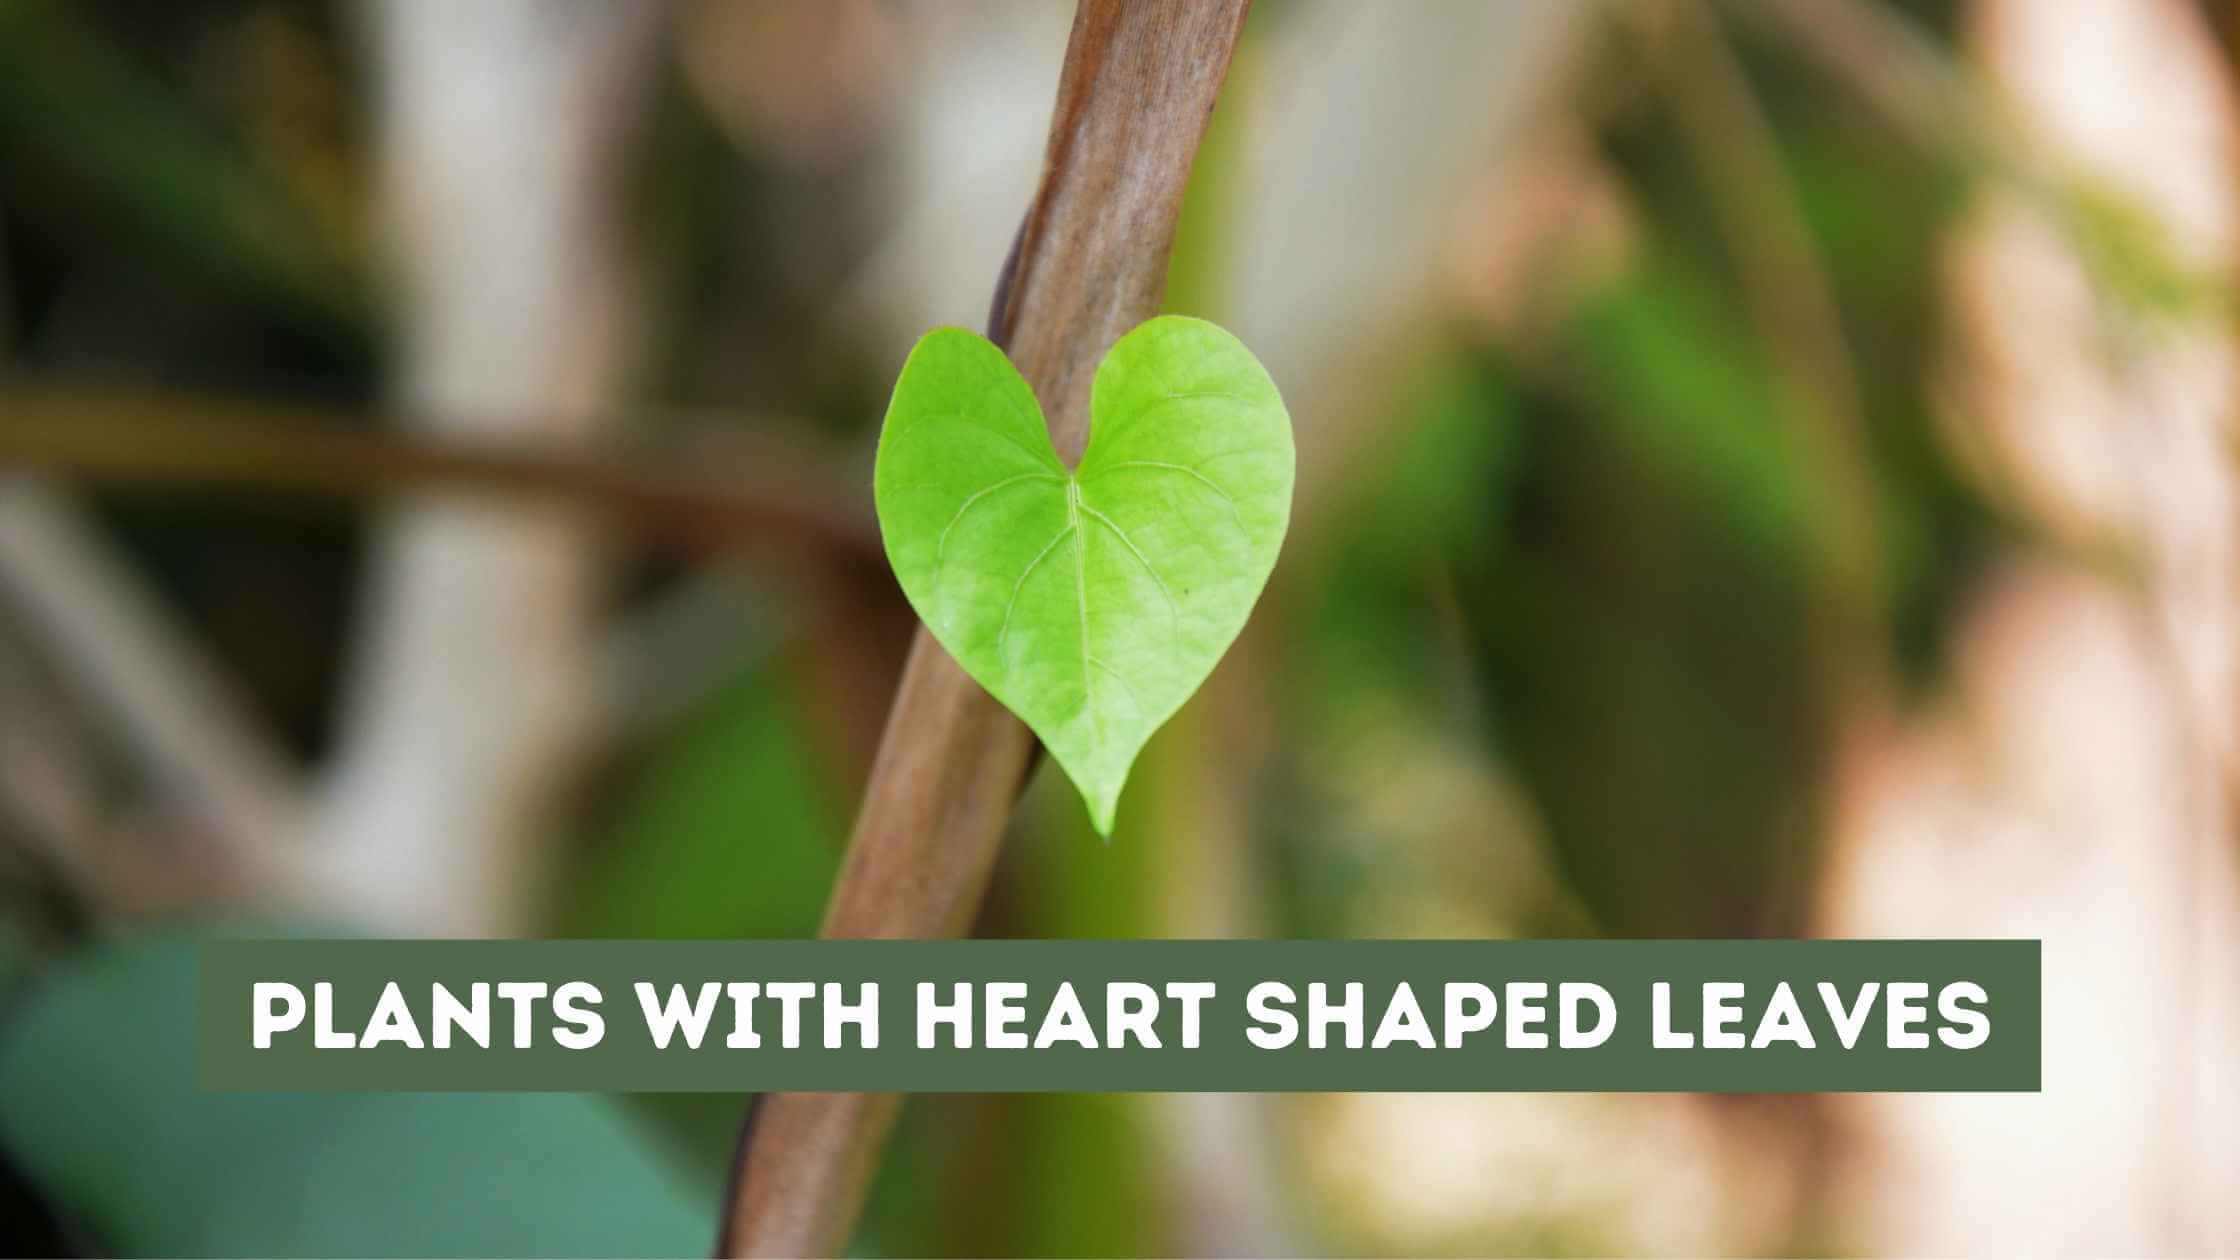 Plants with Heart Shaped Leaves